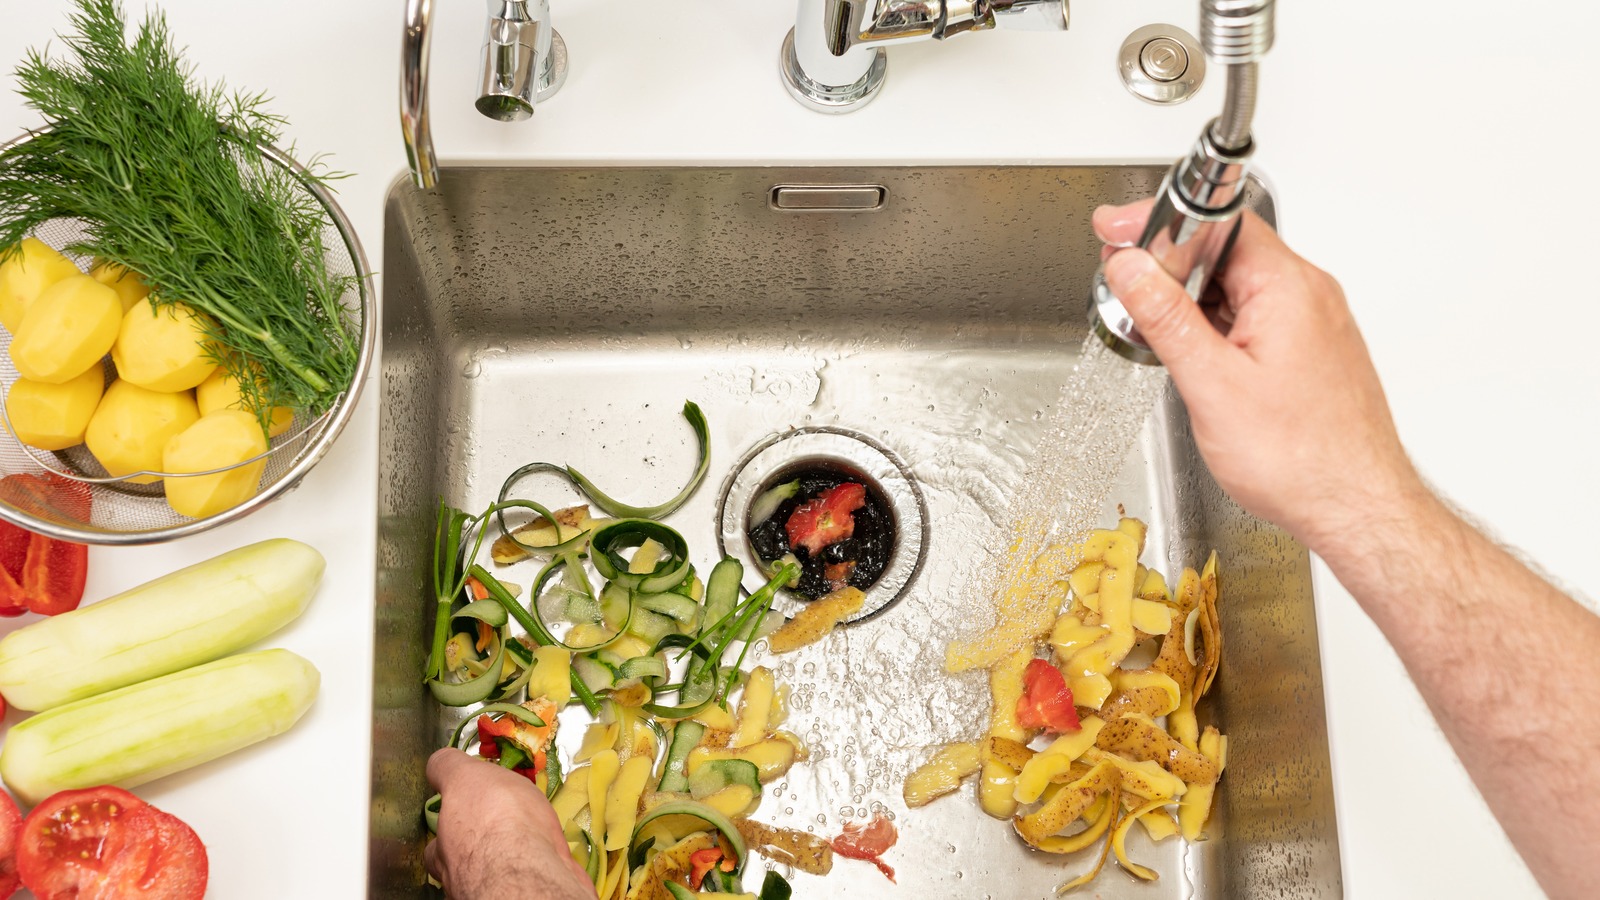 The Garbage Disposal Cleaning Hack You